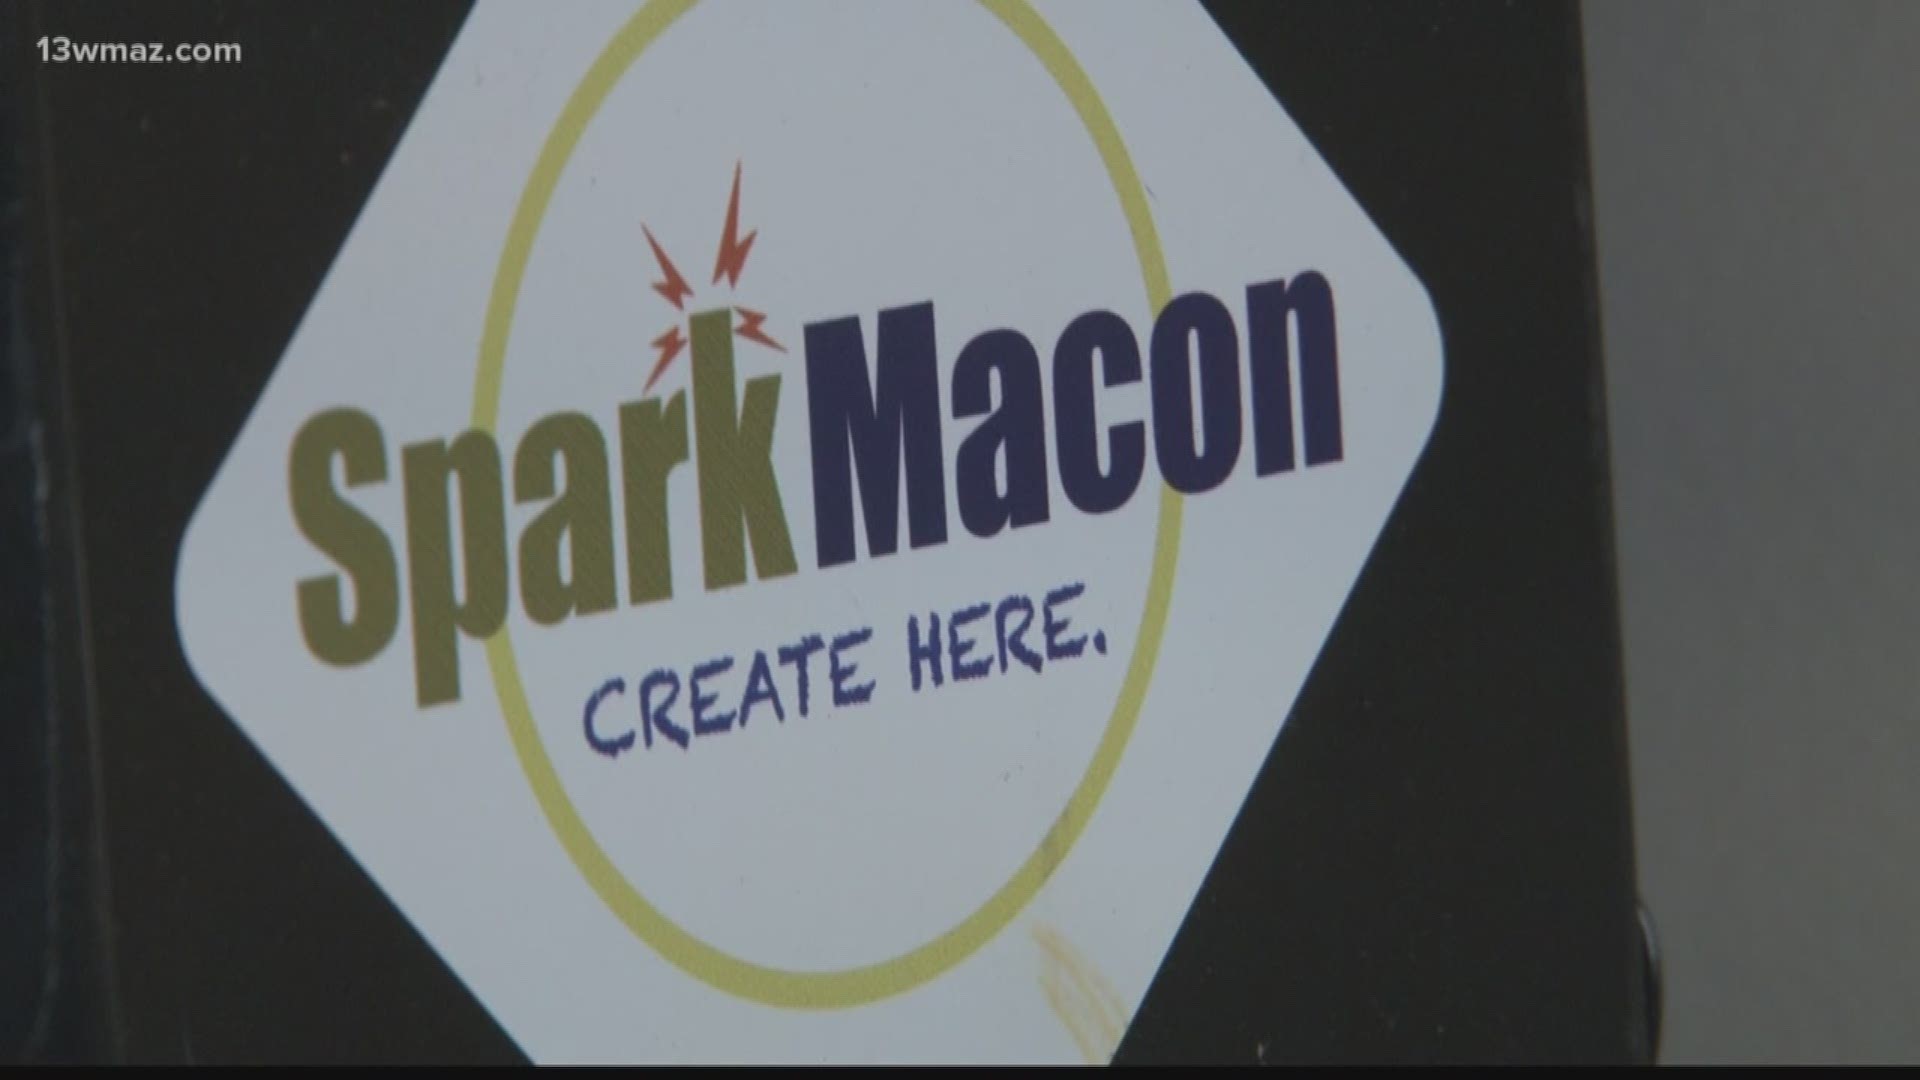 SparkMacon 2.0 opens in industrial area